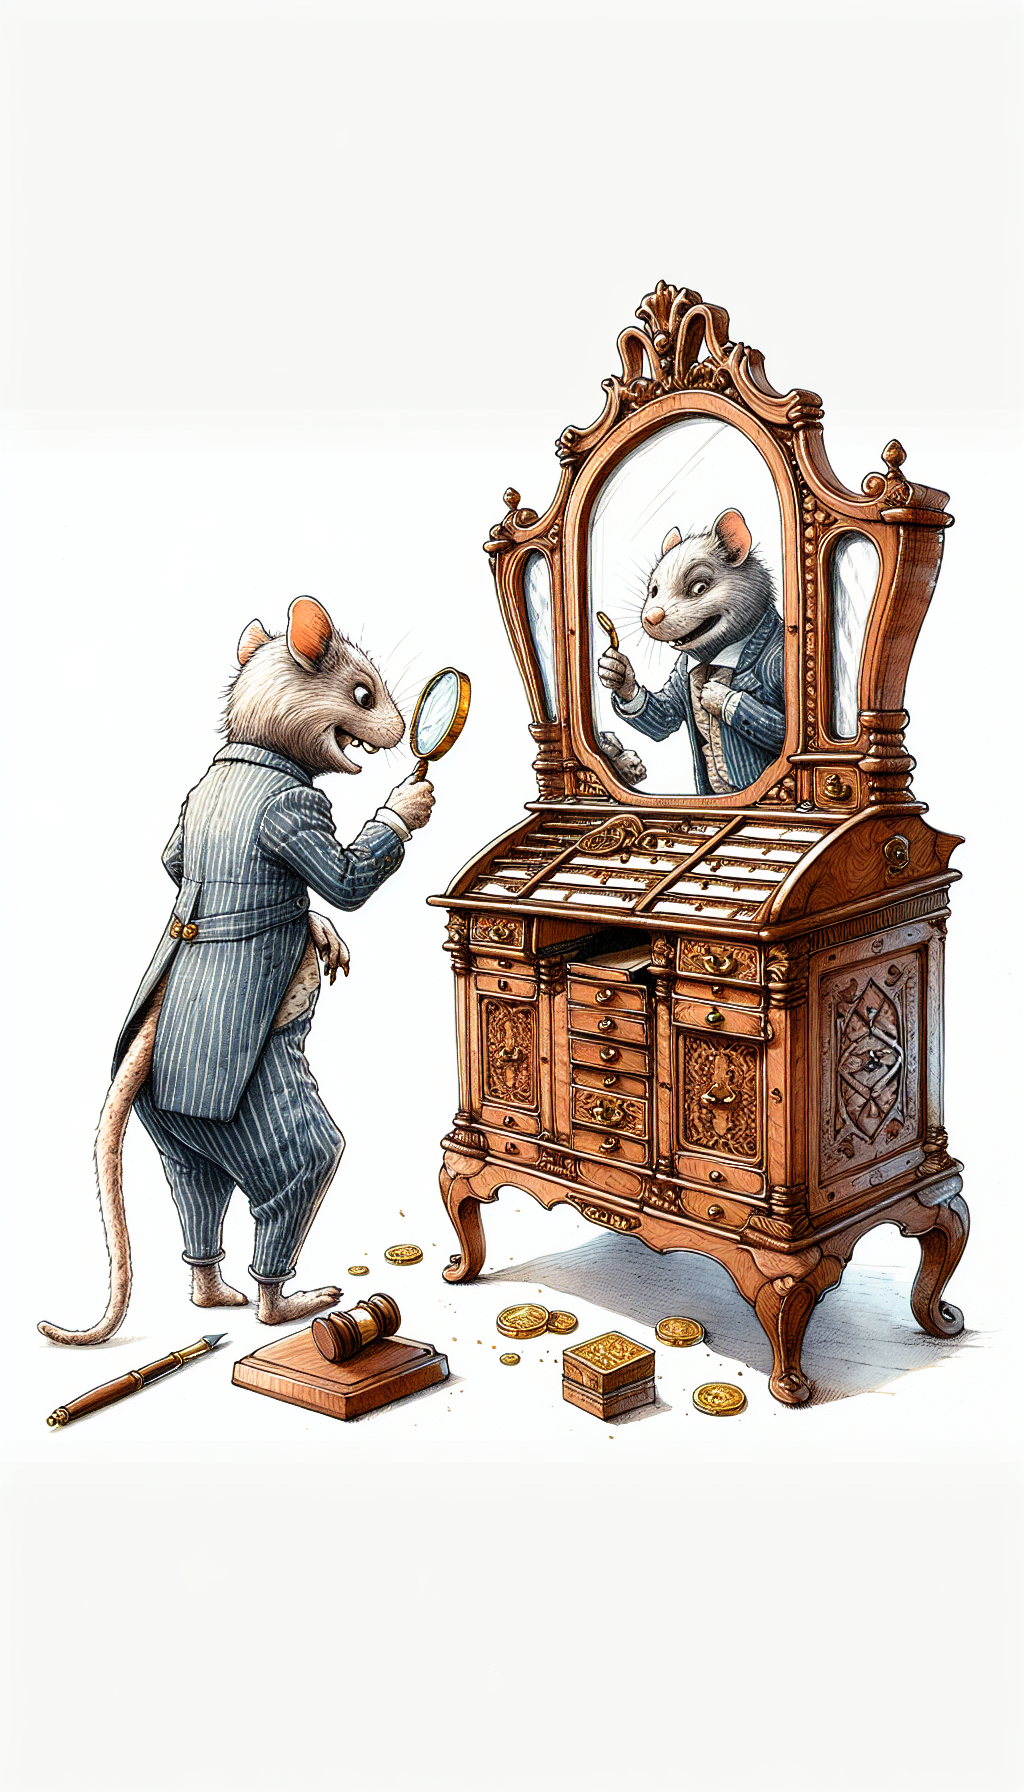 An elegant anthropomorphic drop front secretary desk, with a magnifying glass in one handle, playfully gazes at its reflection winking back from an ornate antique mirror, showcasing intricate wood patterns and hidden compartments. Beside it, golden coins and a gavel hint at its high auction value. The art is a whimsy fusion of watercolor textures and crisp ink lines.